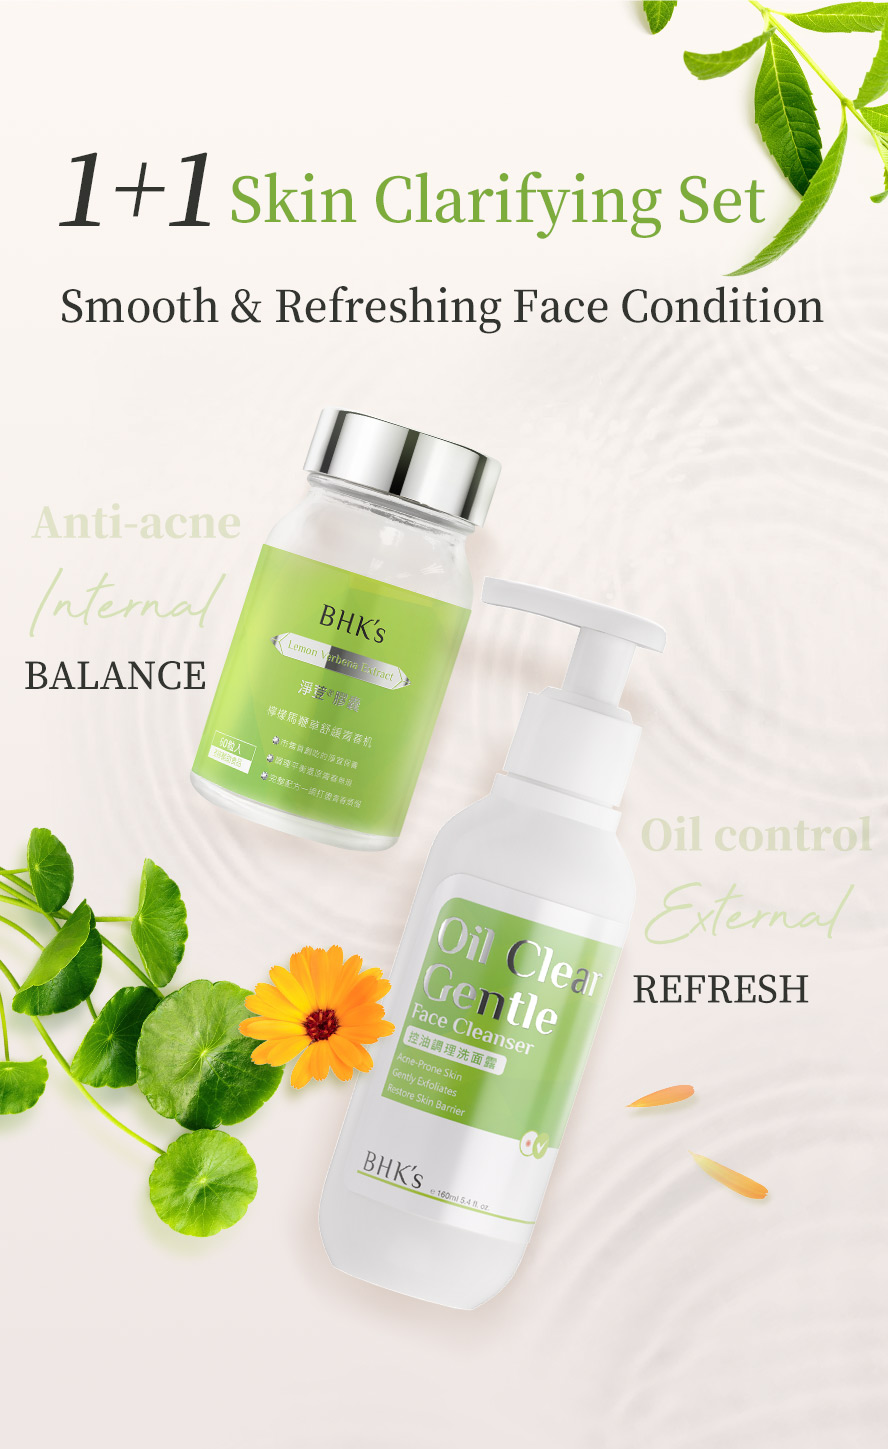 The skin clearifying set for smooth and refreshing dace condition with internal and external regulation